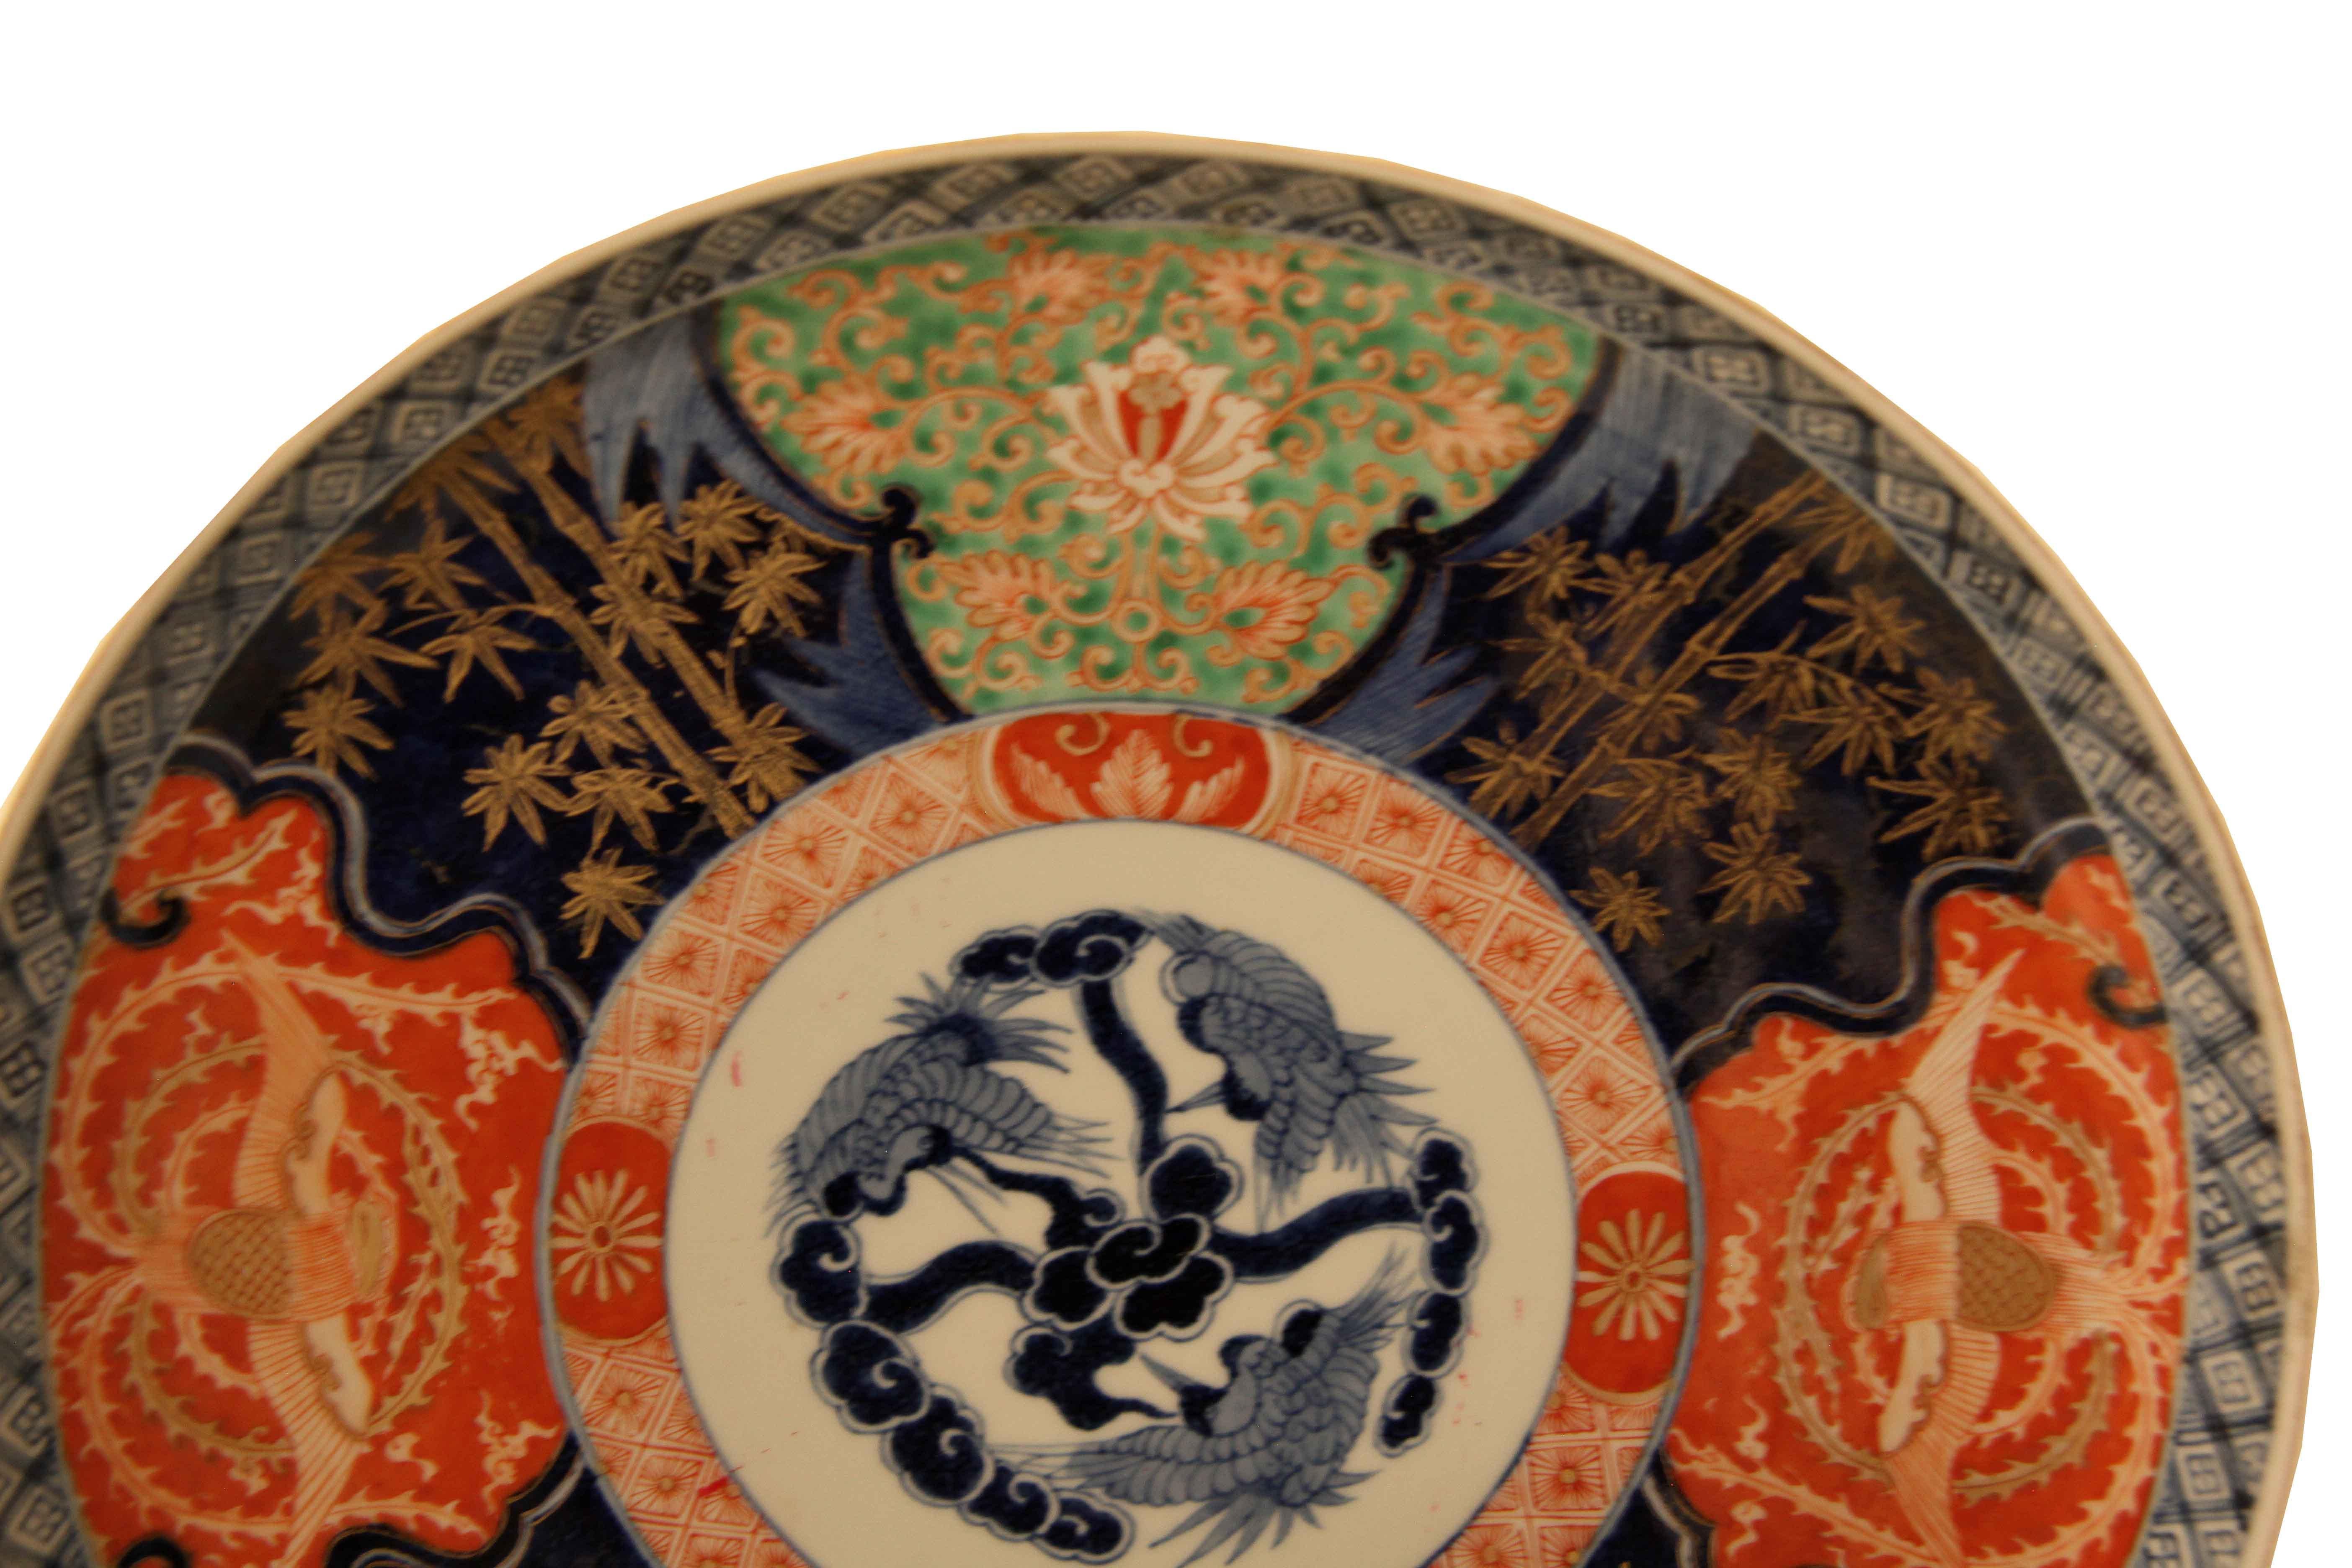 Pair of Japanese Imari chargers, the outer border to the rim is a narrow crosshatch of blue and white lines;  inner border is alternating cartouches with birds, flowers and bamboo in typical Imari colors; the center features three birds with wings